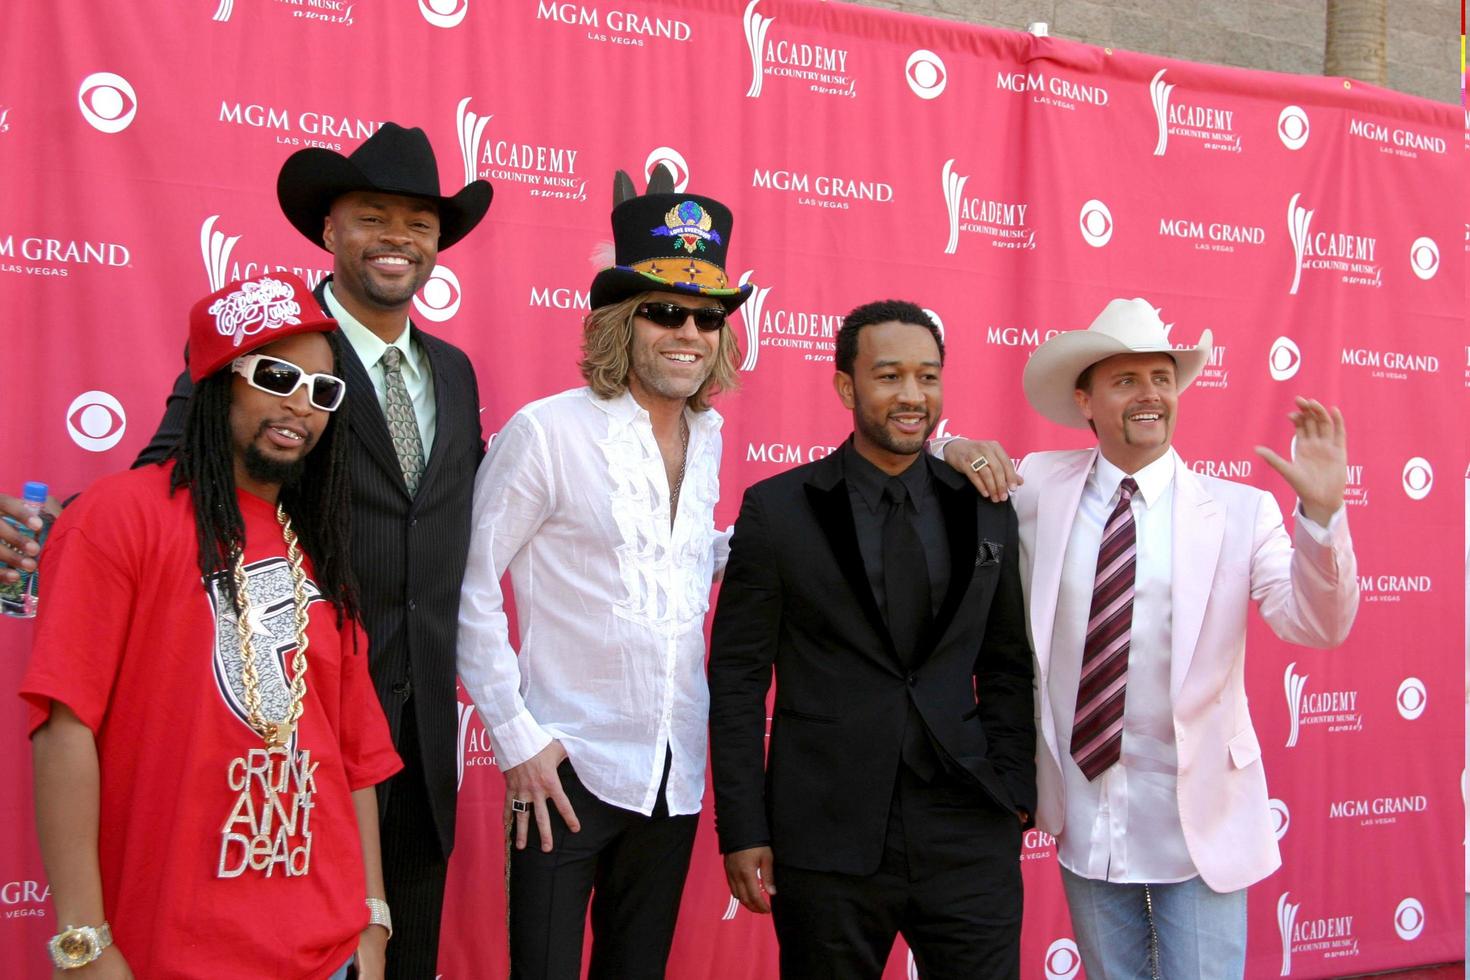 Big and Rich,Lil Jon,Cowboy Troy, and John Legend Academy of Country Music Awards MGM Grand Garden Arena Las Vegas, NV May 15, 2007 2007 photo